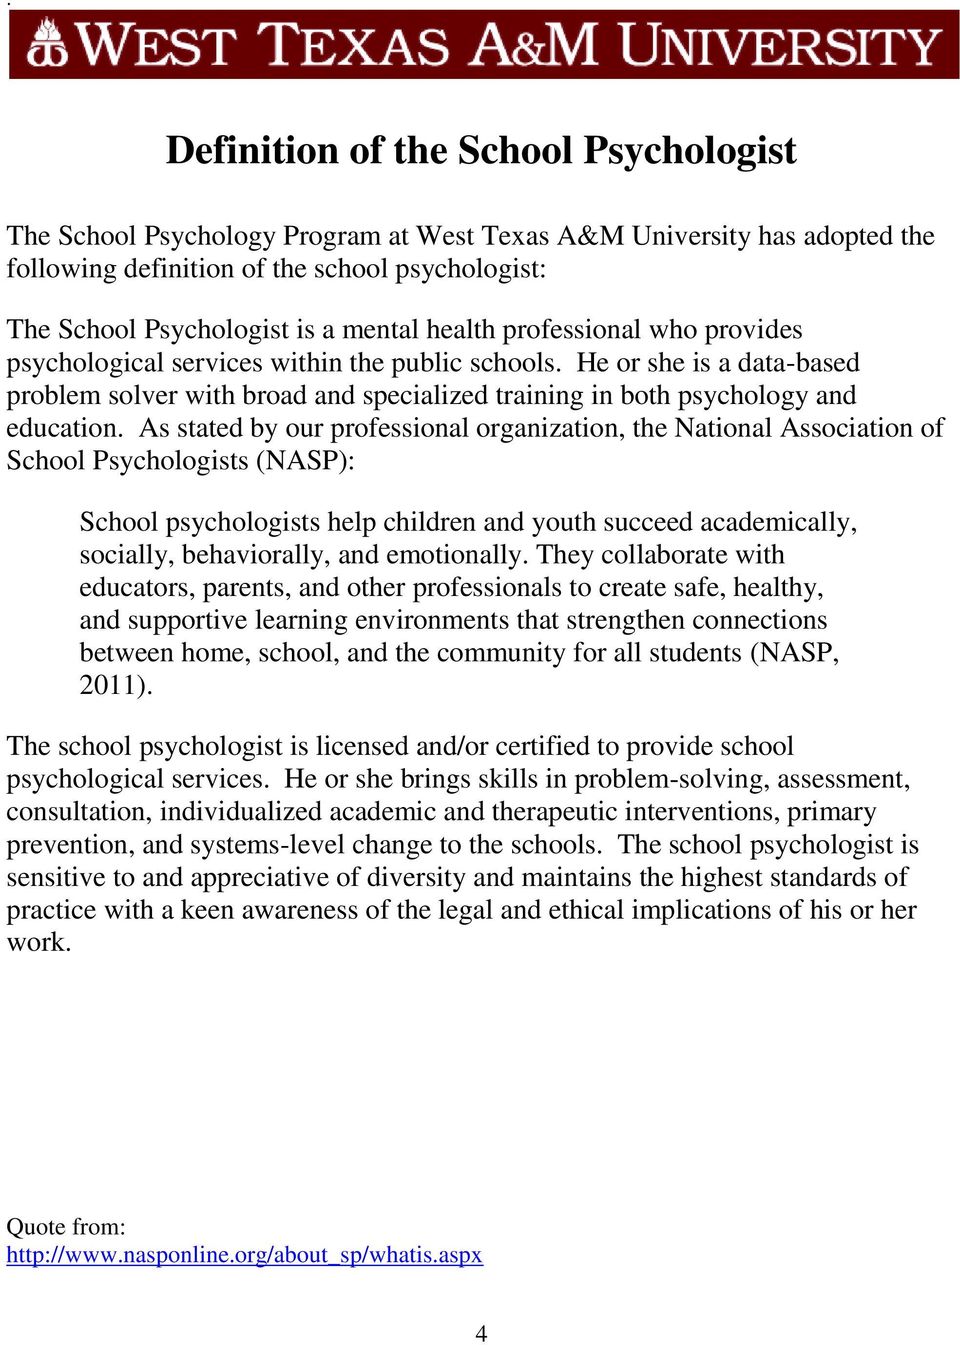 As stated by our professional organization, the National Association of School Psychologists (NASP): School psychologists help children and youth succeed academically, socially, behaviorally, and